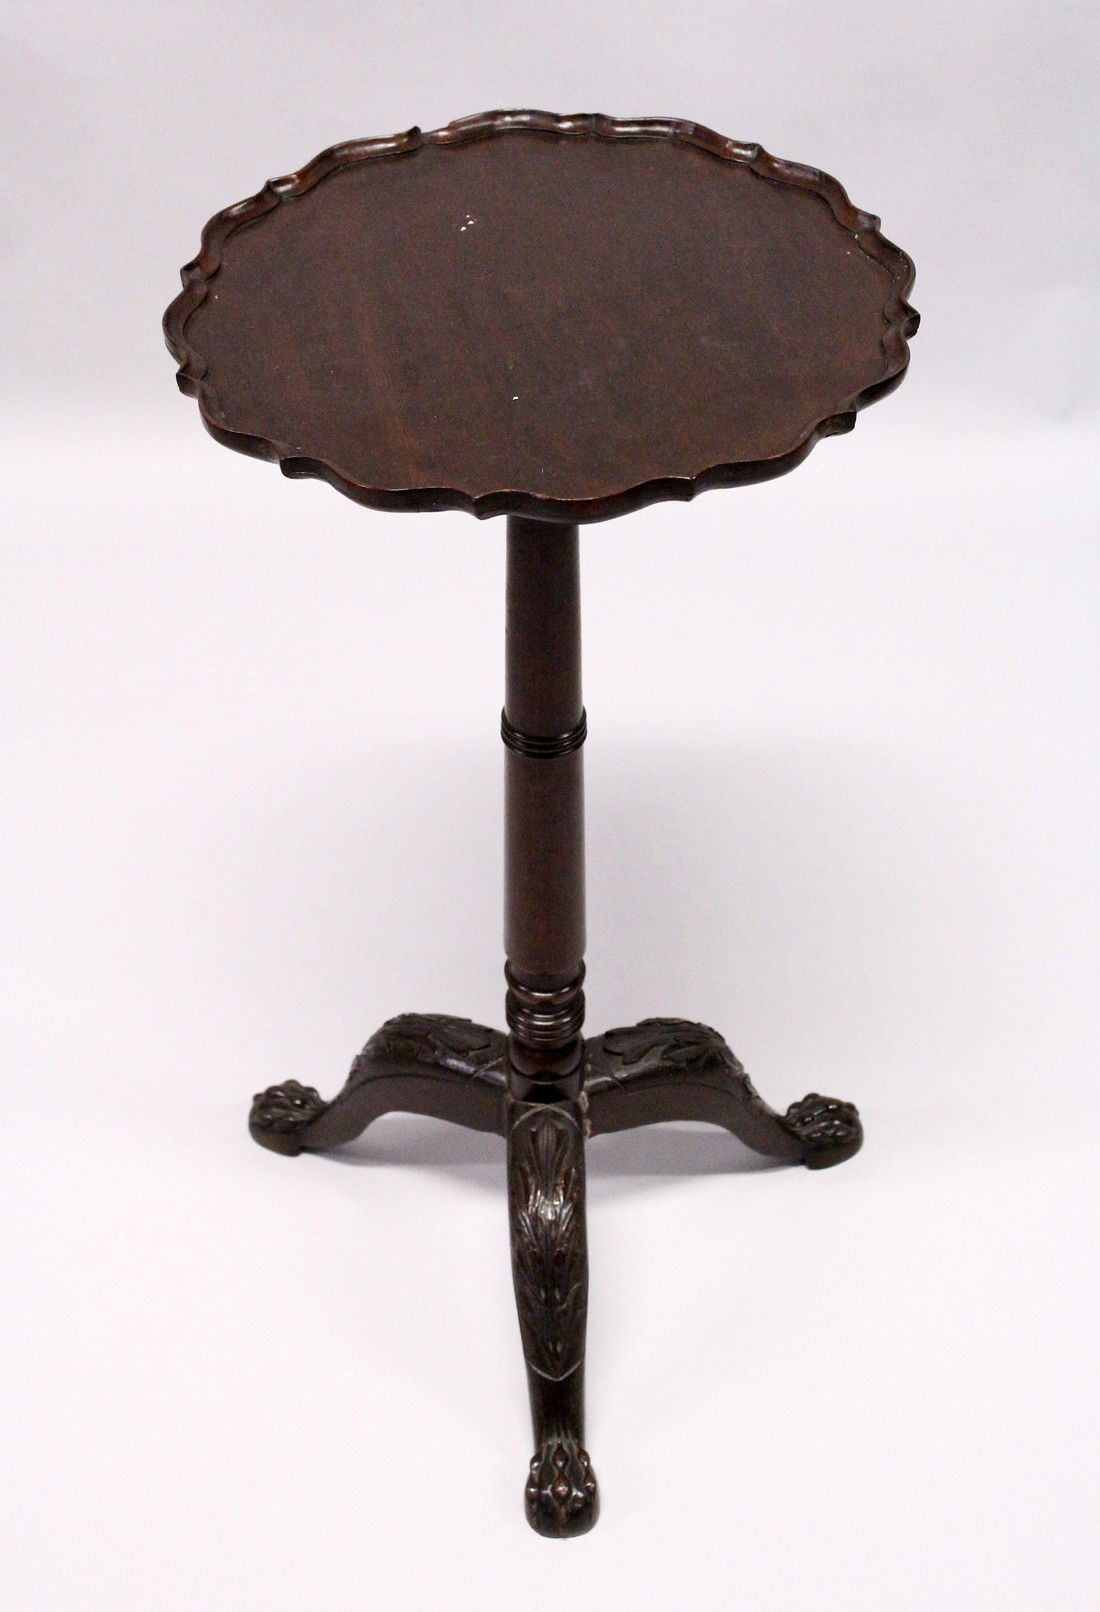 A GEORGE III DESIGN MAHOGANY TRIPOD TABLE, with pie-crust top, turned column on three carved legs